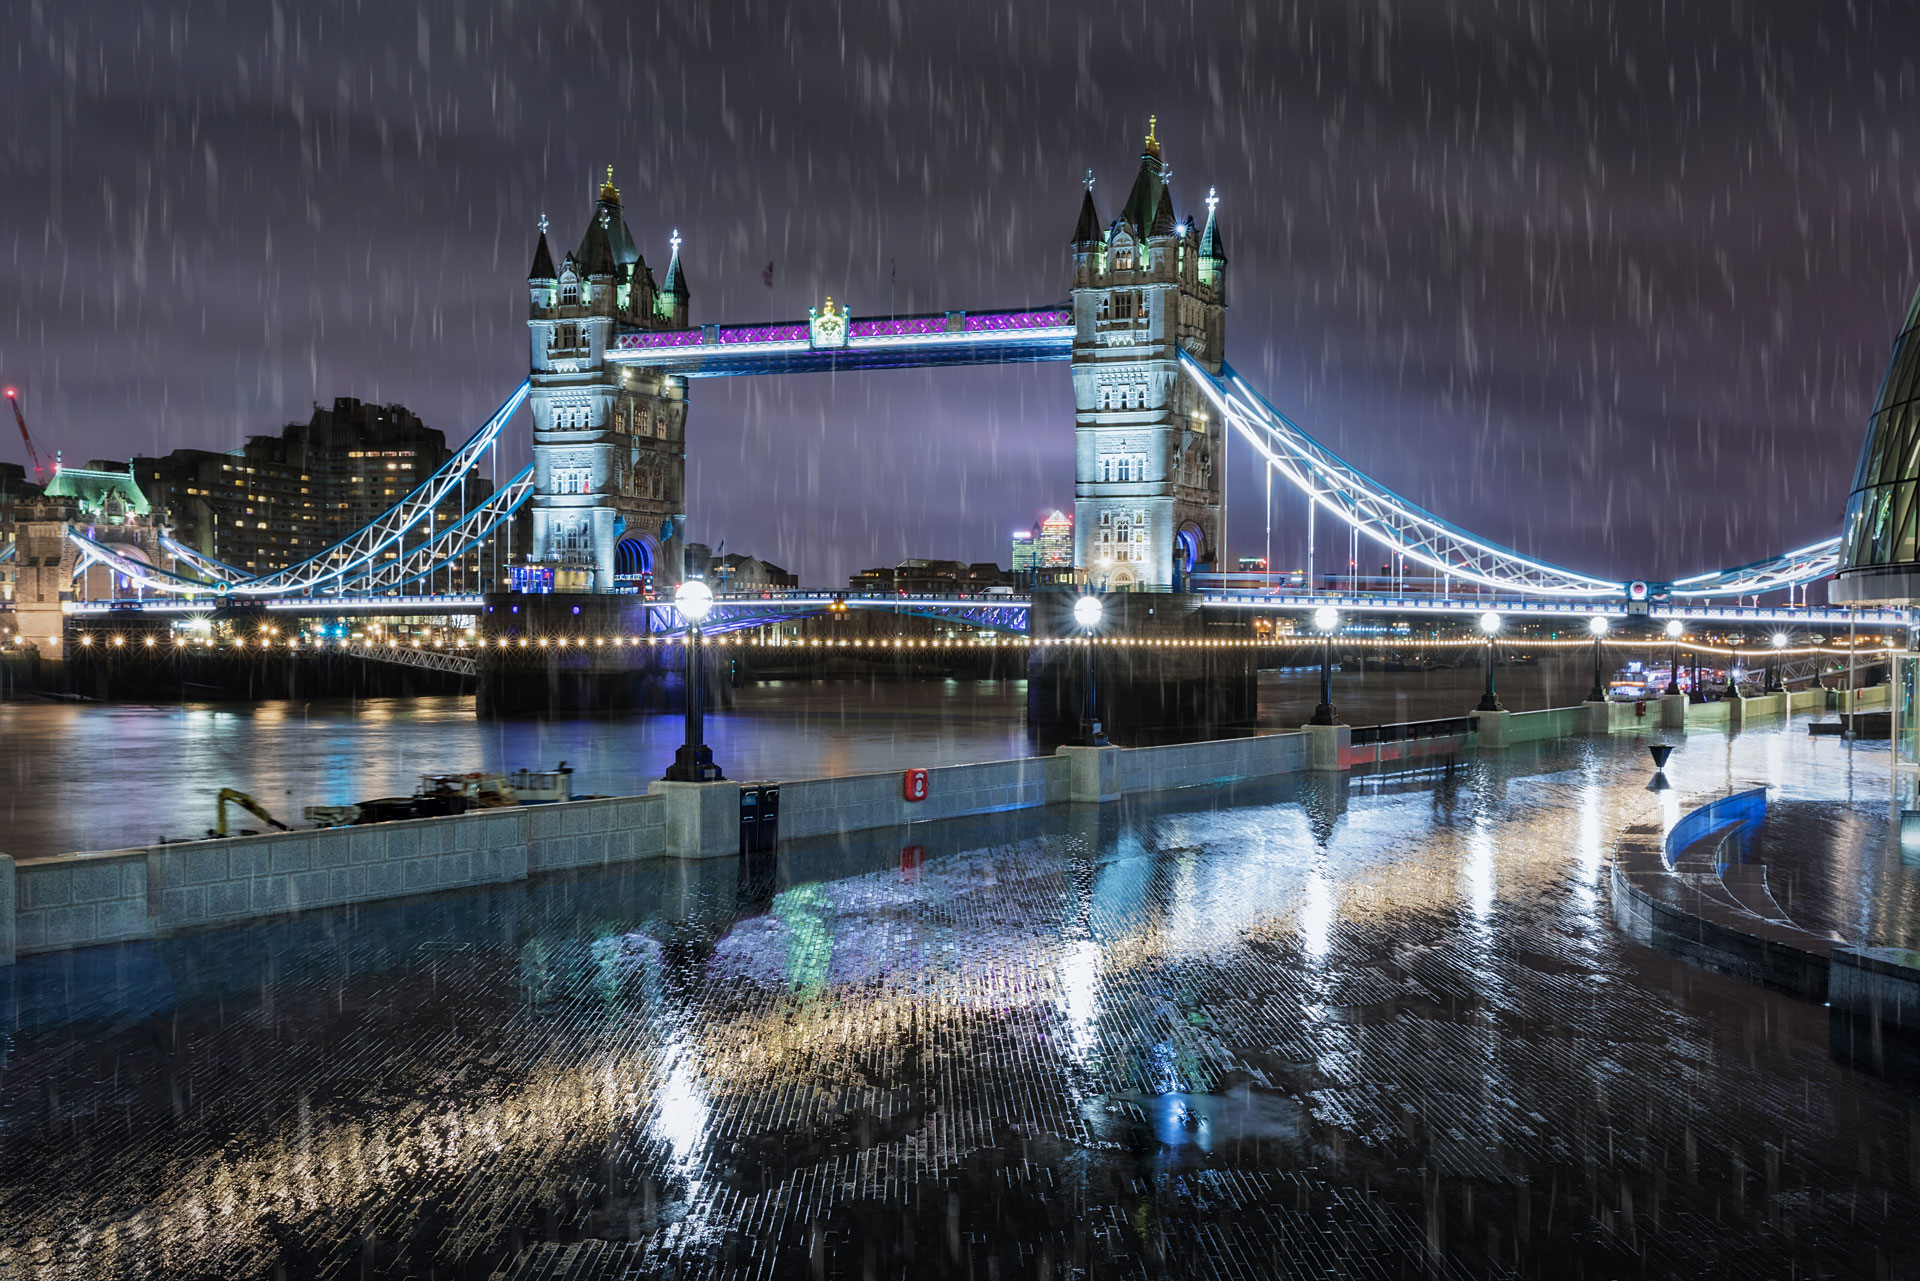 places to visit in london on rainy days